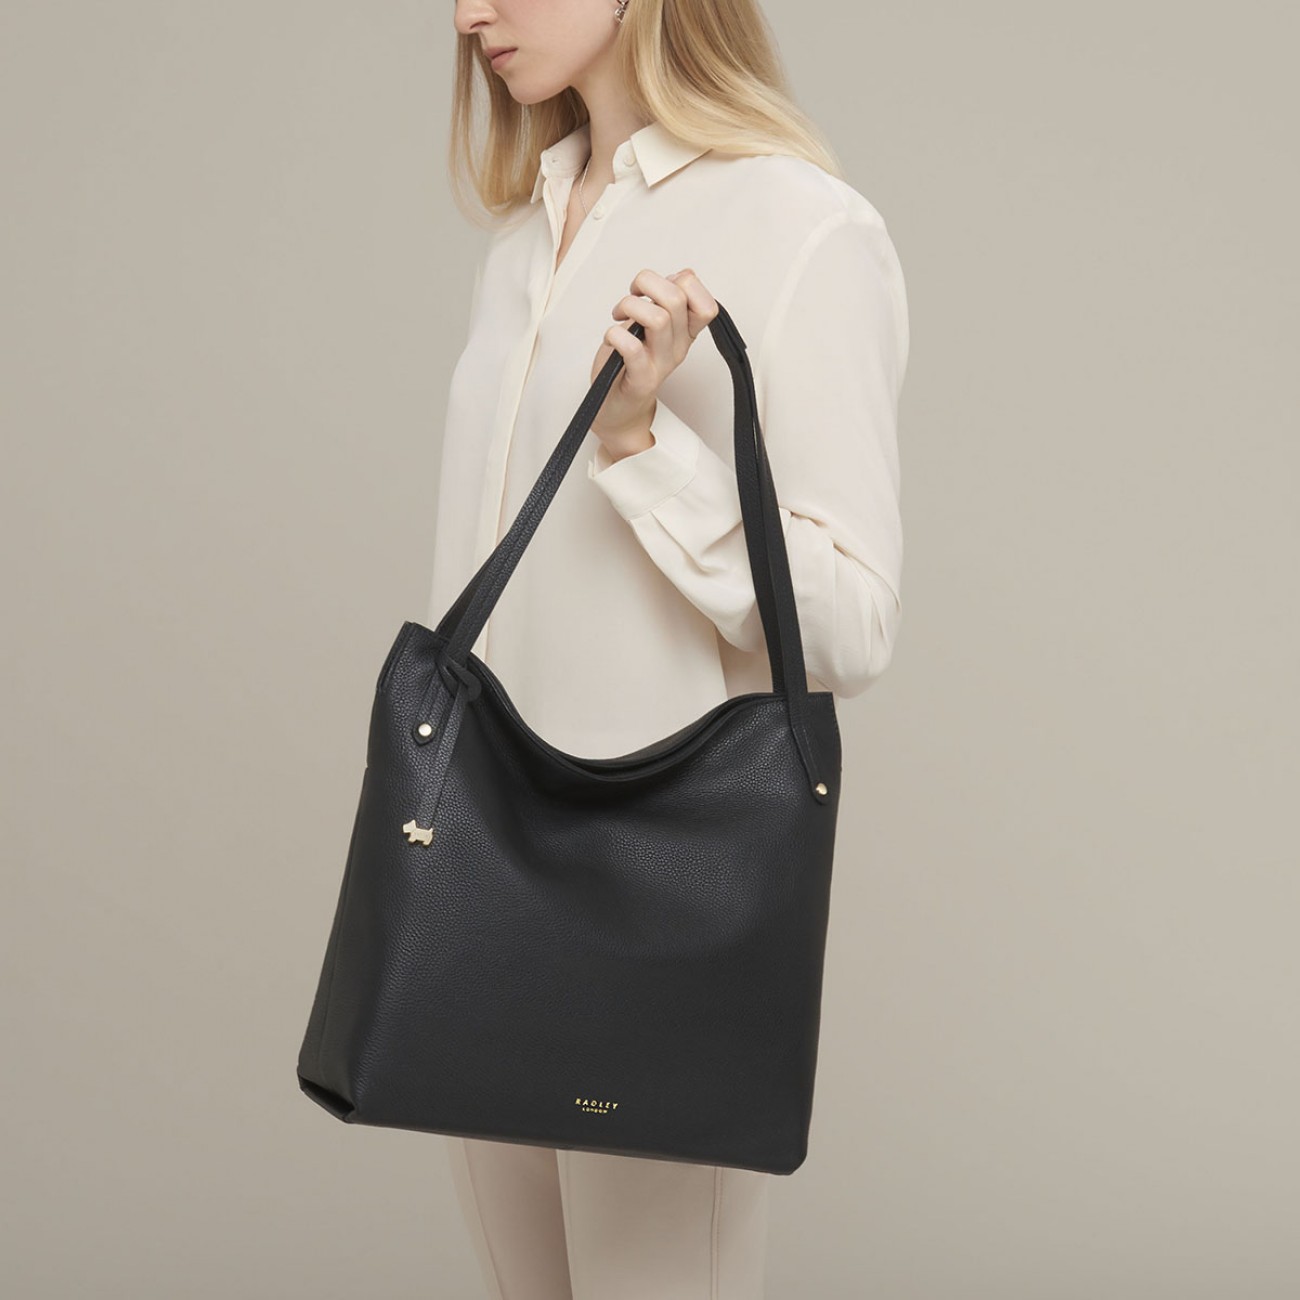 RADLEY LONDON Clearance Sale 60% Off! | Buyandship India